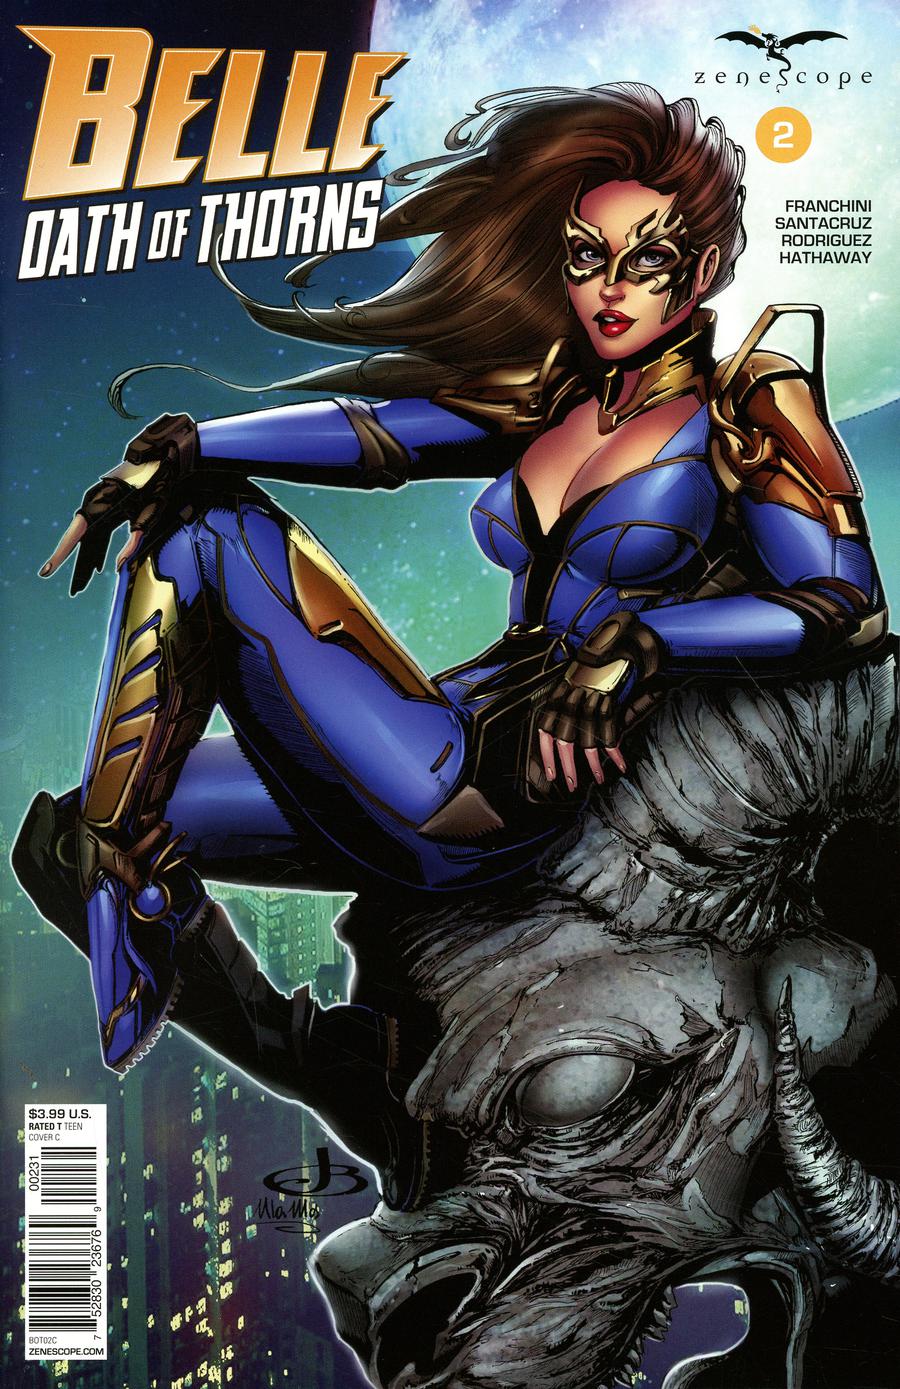 Grimm Fairy Tales Presents Belle Oath Of Thorns #2 Cover C Jenevieve Broomall